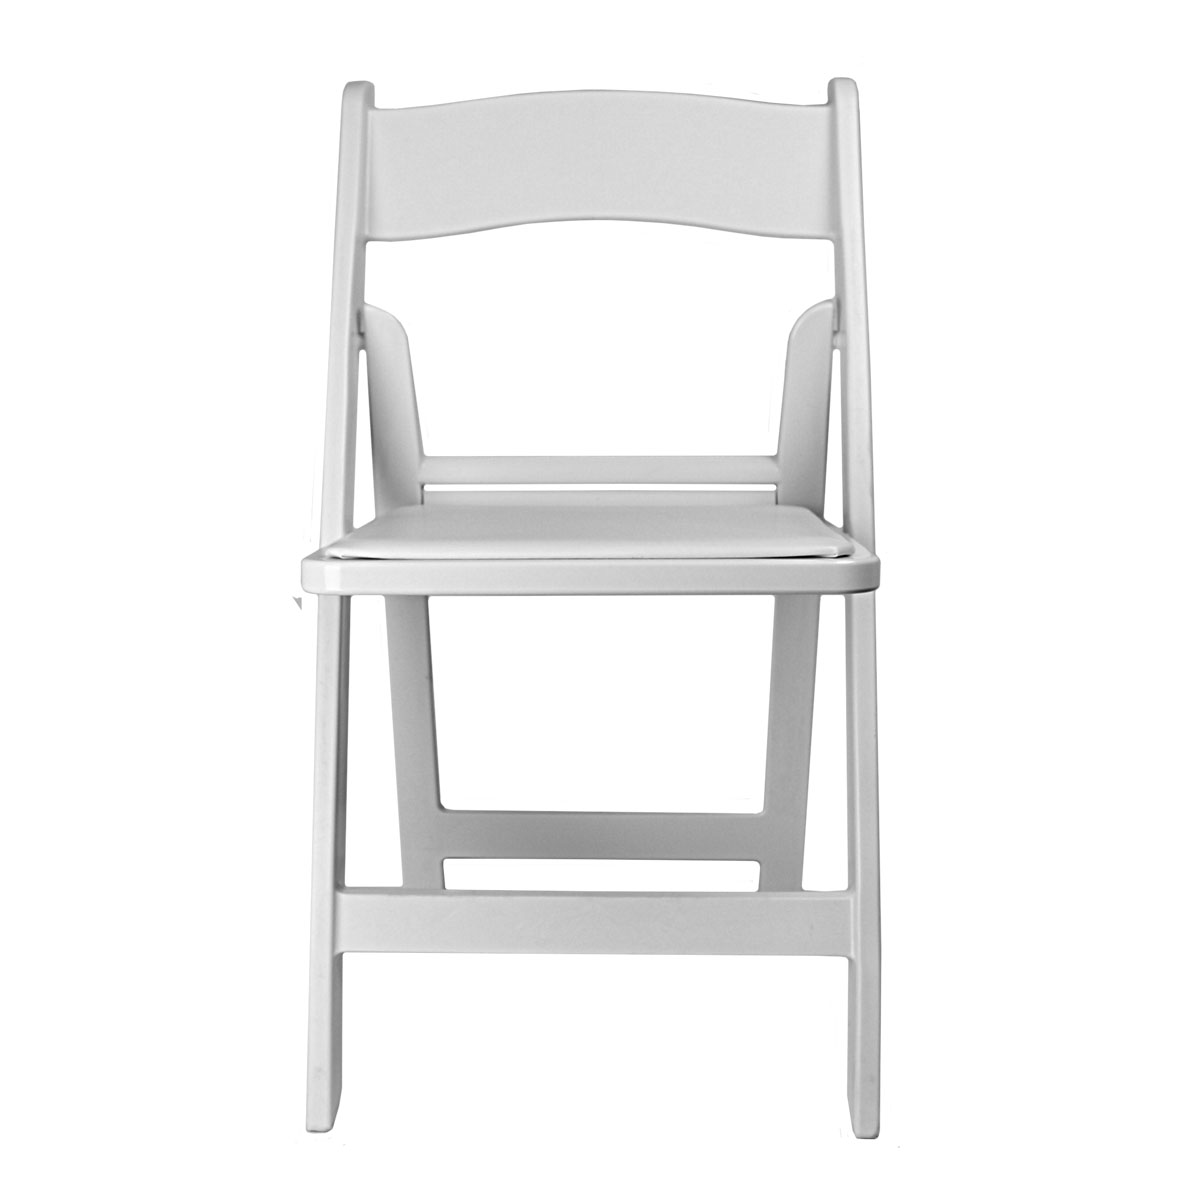 Chair White Garden With Padded Seat